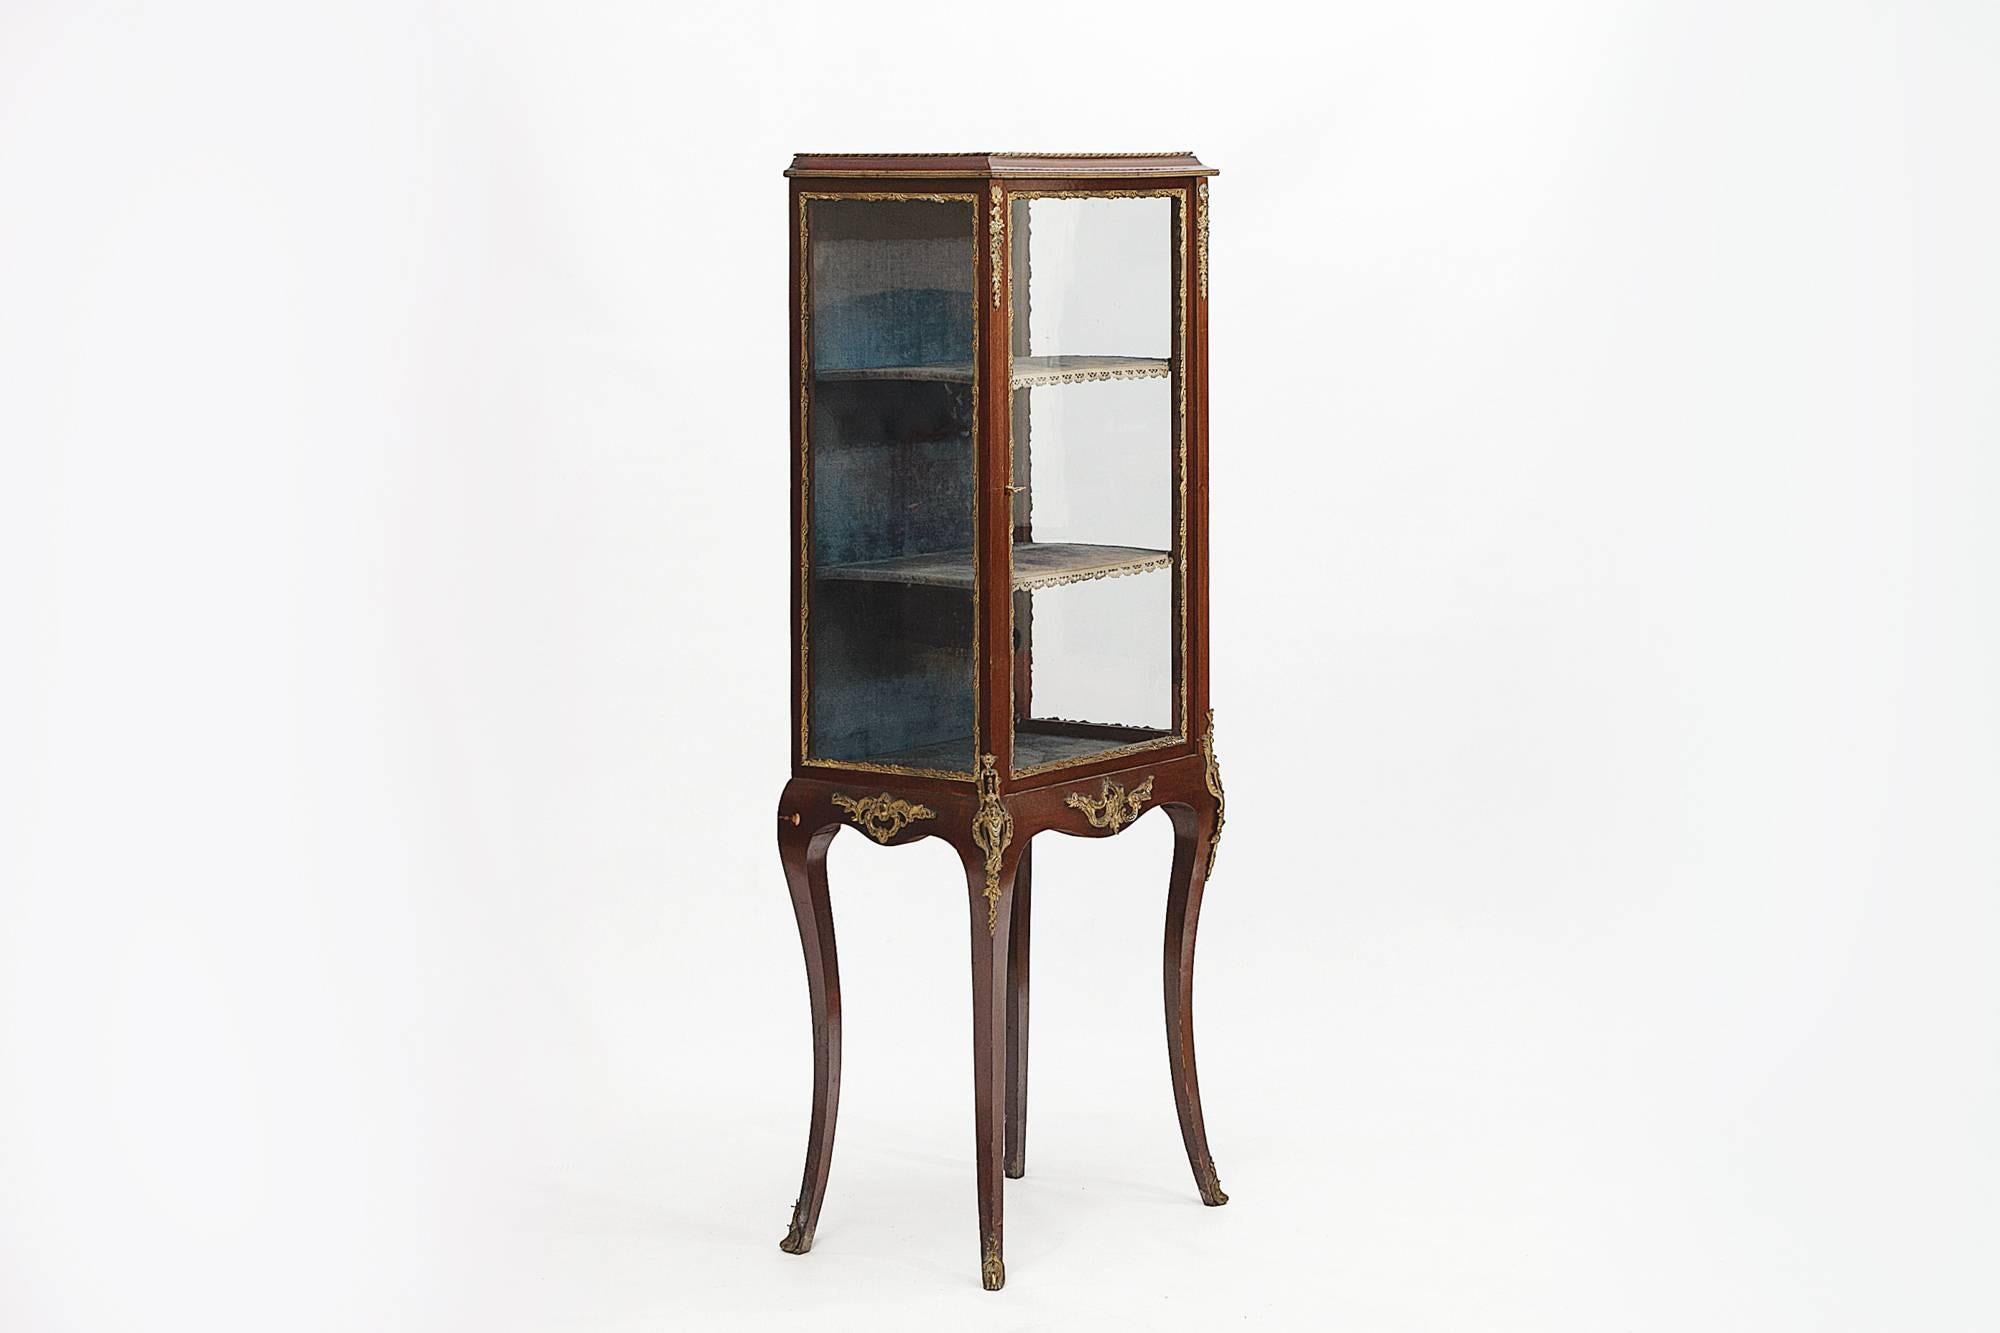 19th century Regency French style mahogany vitrine with brass mounts, the cabinet with two shelves, the interior lined with velvet supported on sabre legs.